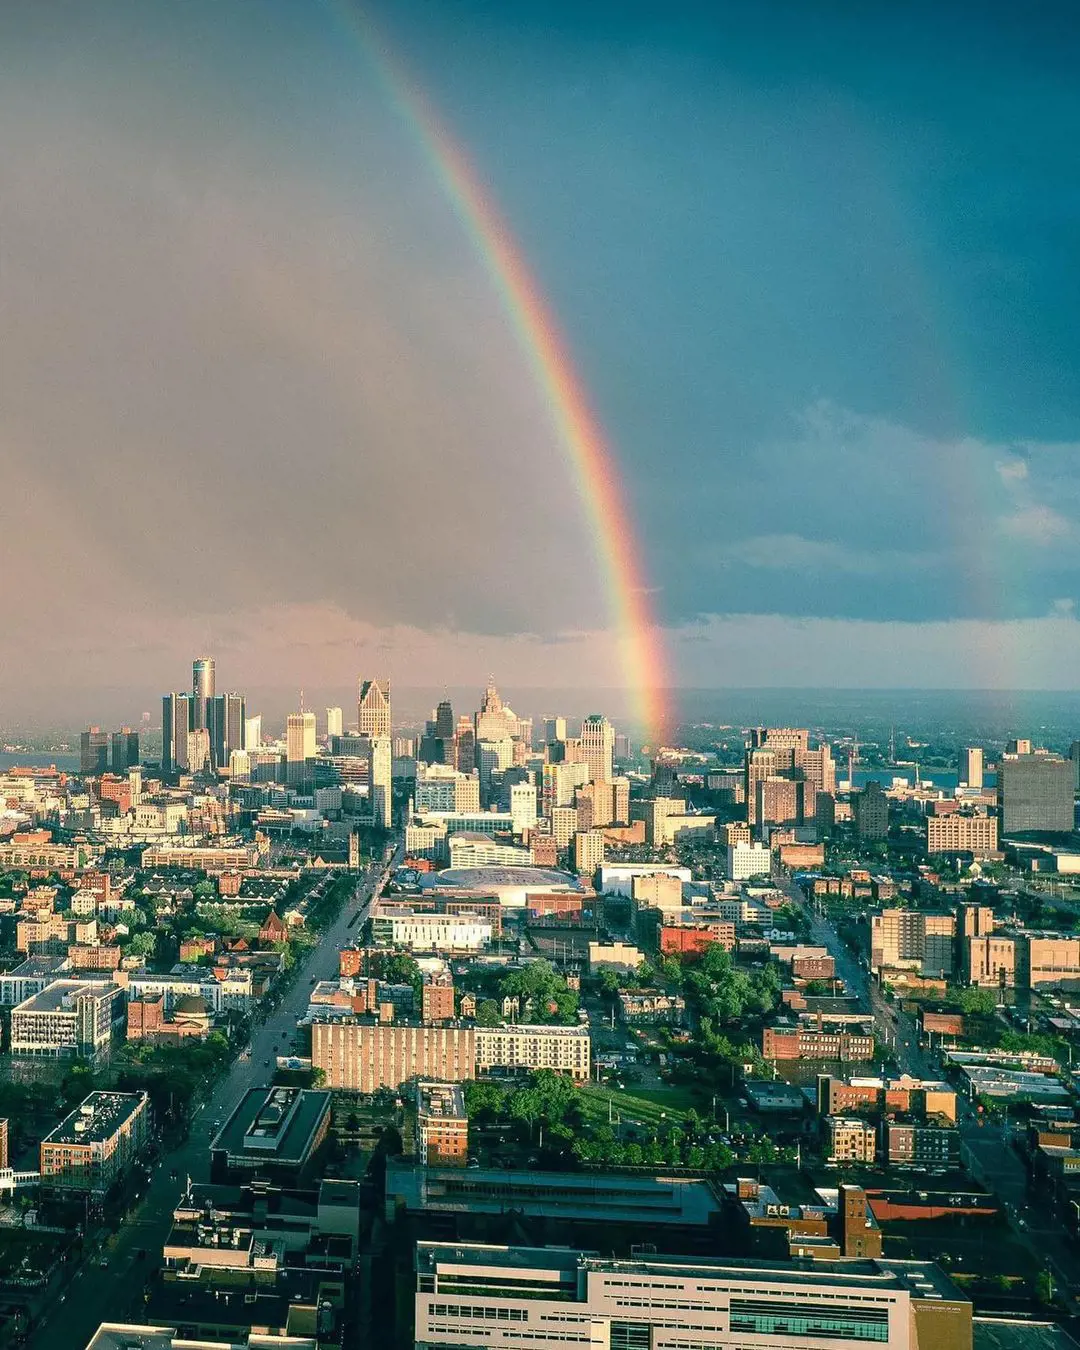 Rainbow in the beautiful city of Detroit. (Photo By: @rfl0)